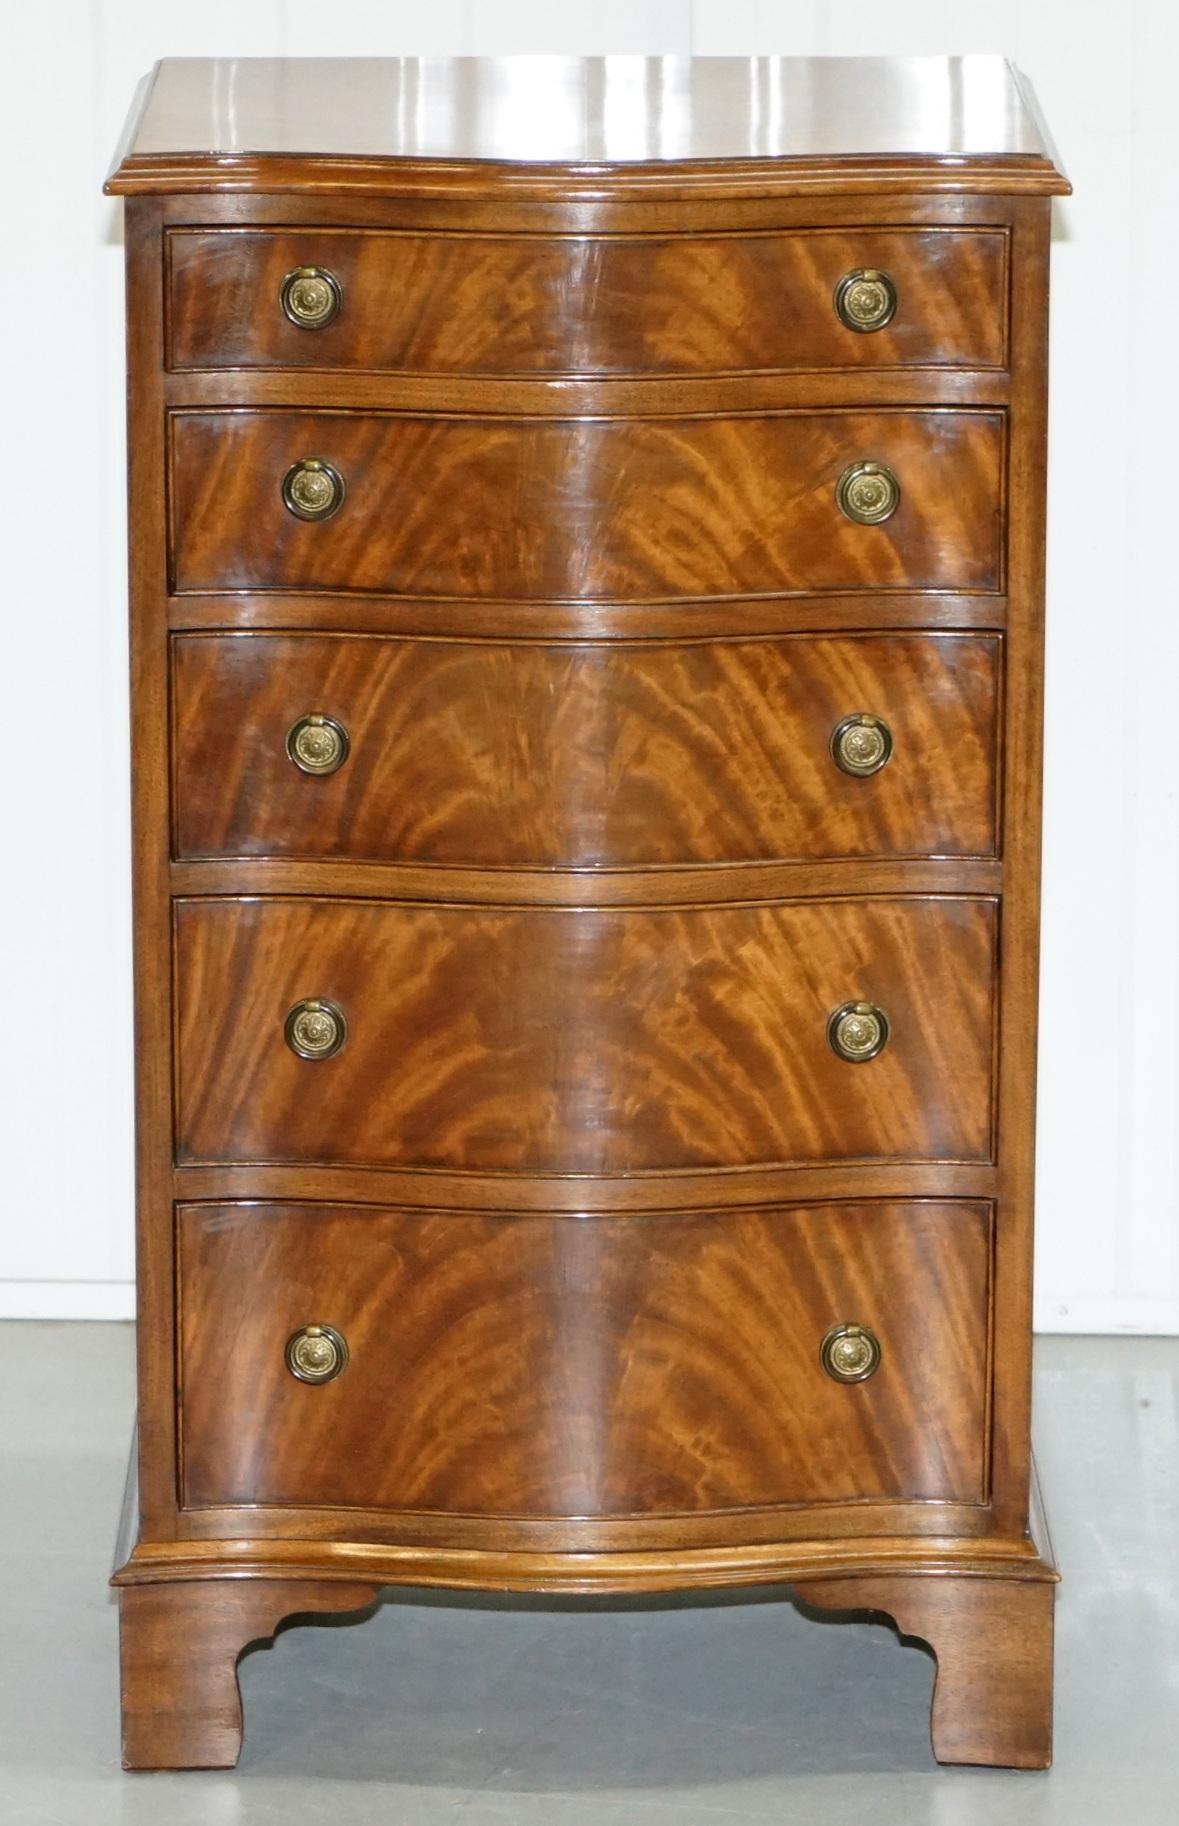 We are delighted to offer for sale this very nice handmade in England by Bevan Funnell flamed mahogany serpentine fronted tall boy chest of drawers

A good looking well made chest, a nice size, fits in any room, the curved to the front makes this